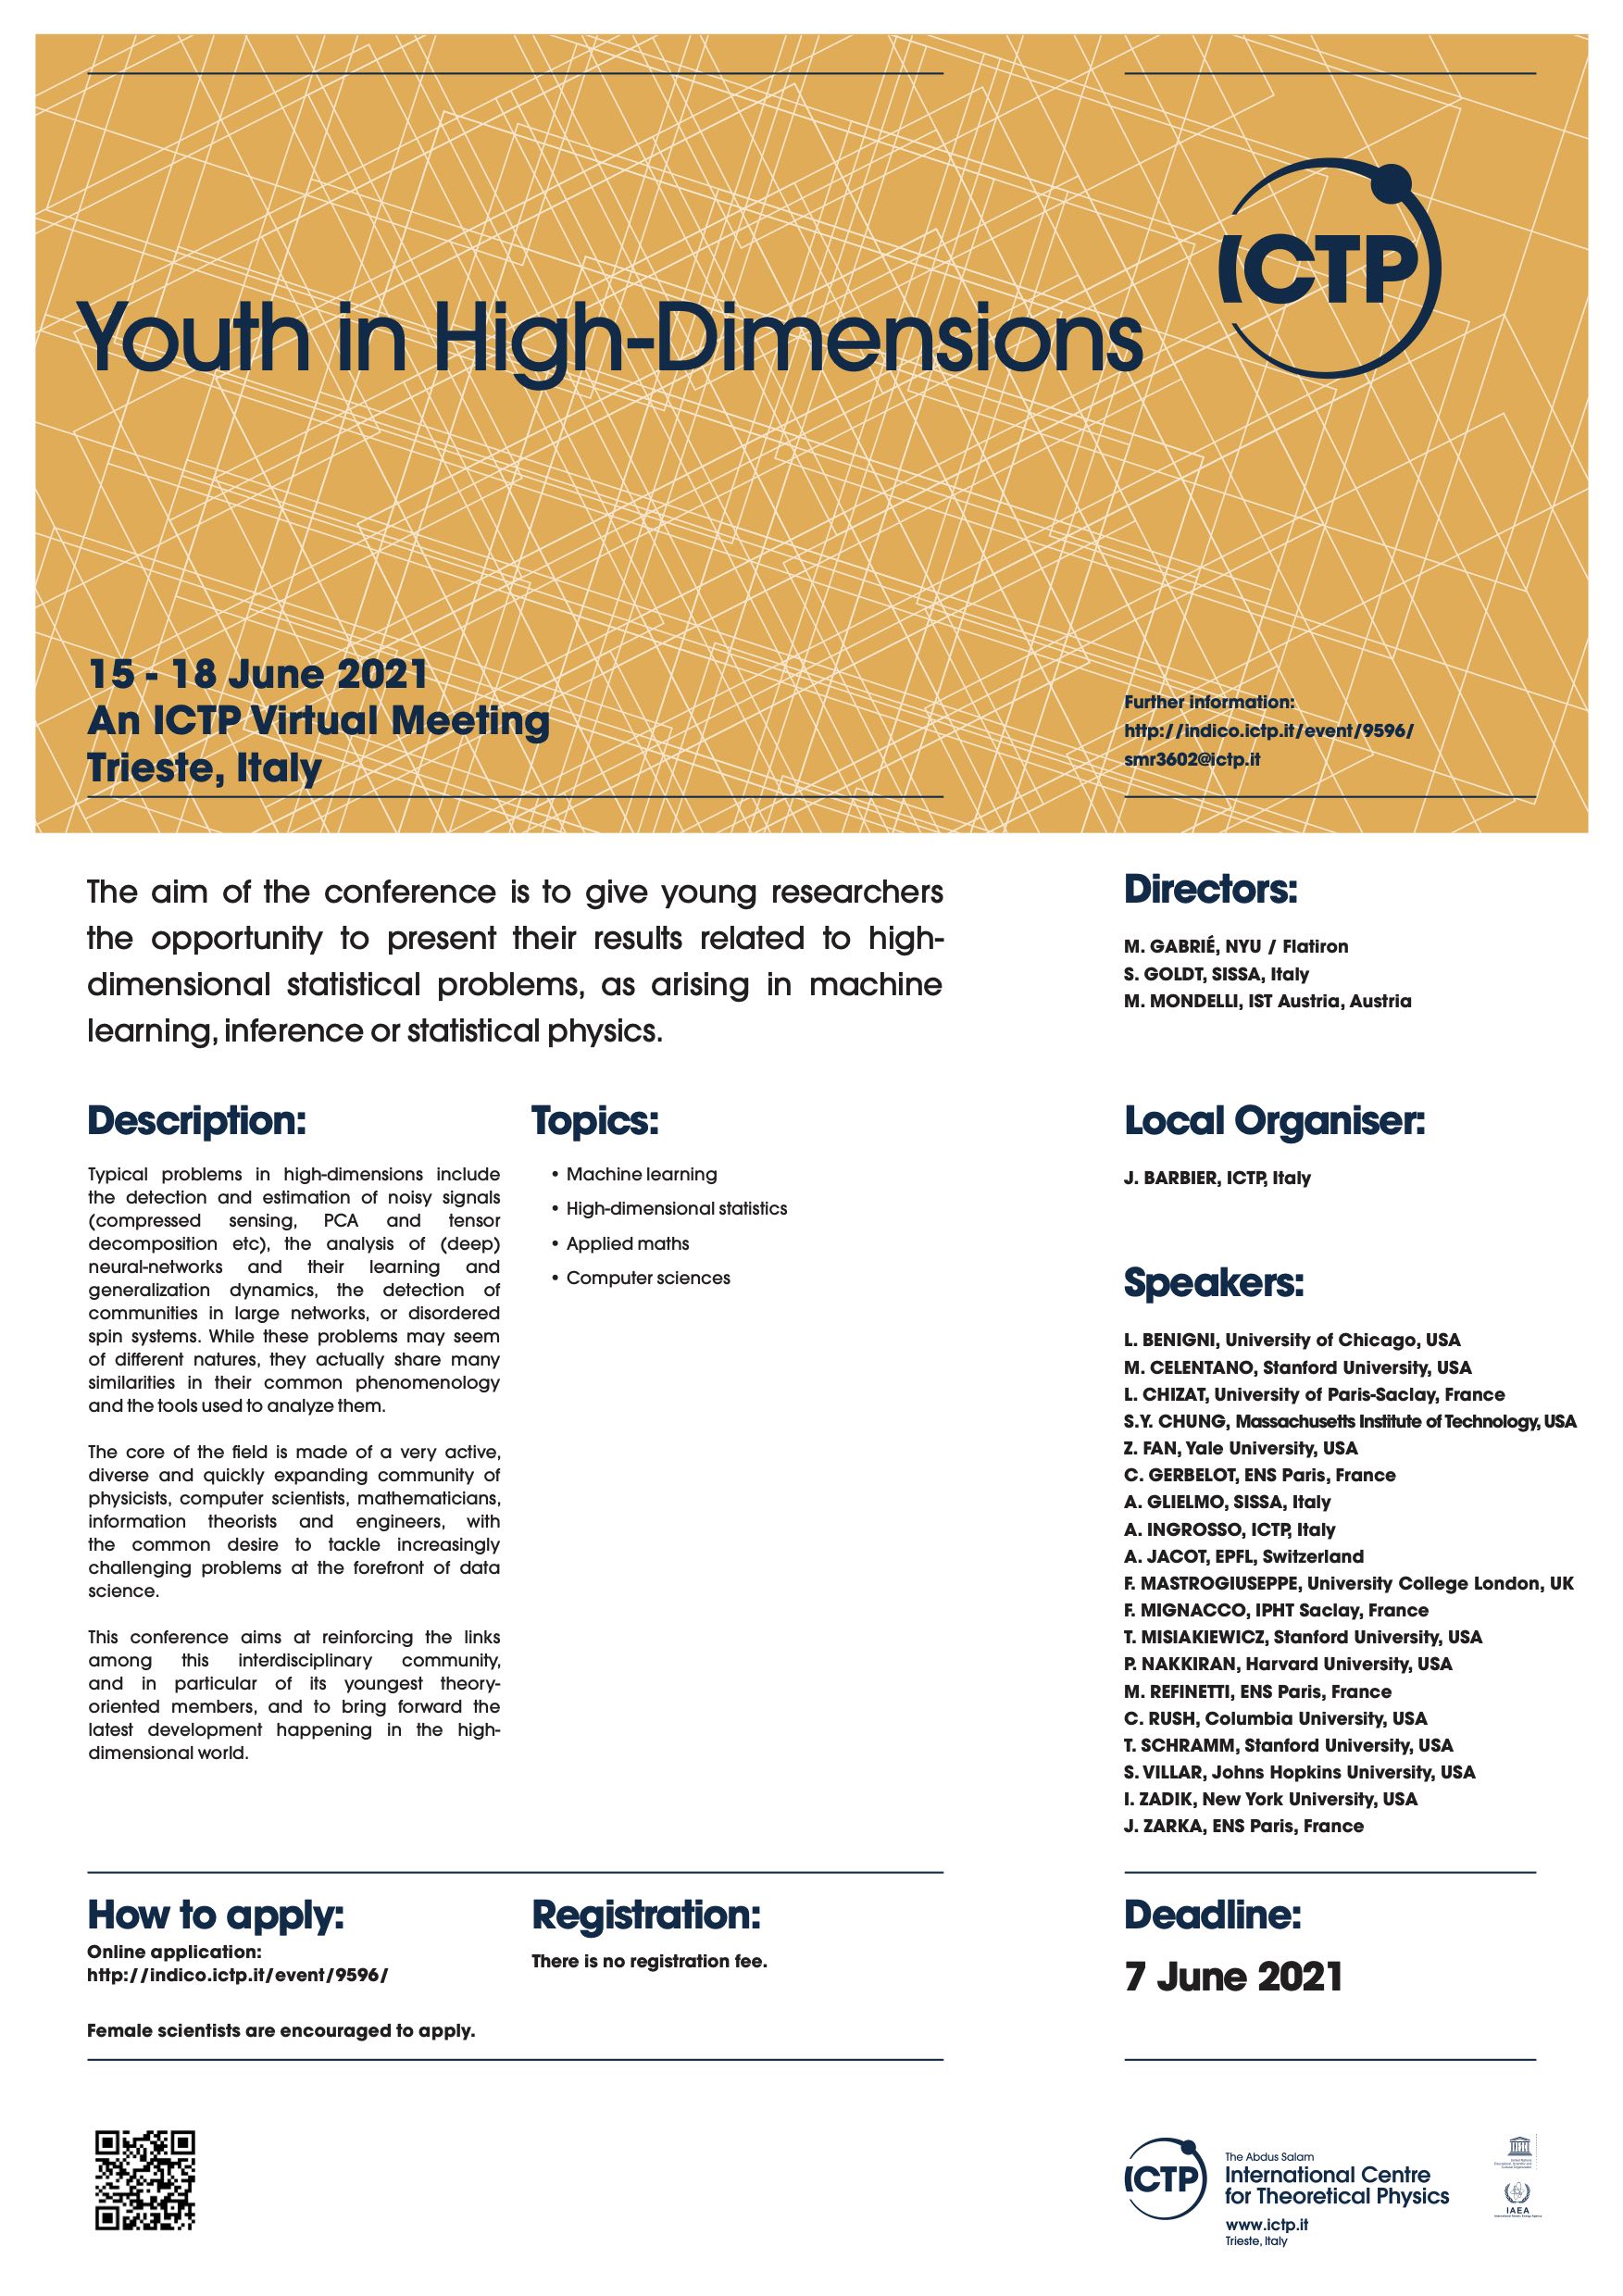 Youth in High Dimensions - Poster